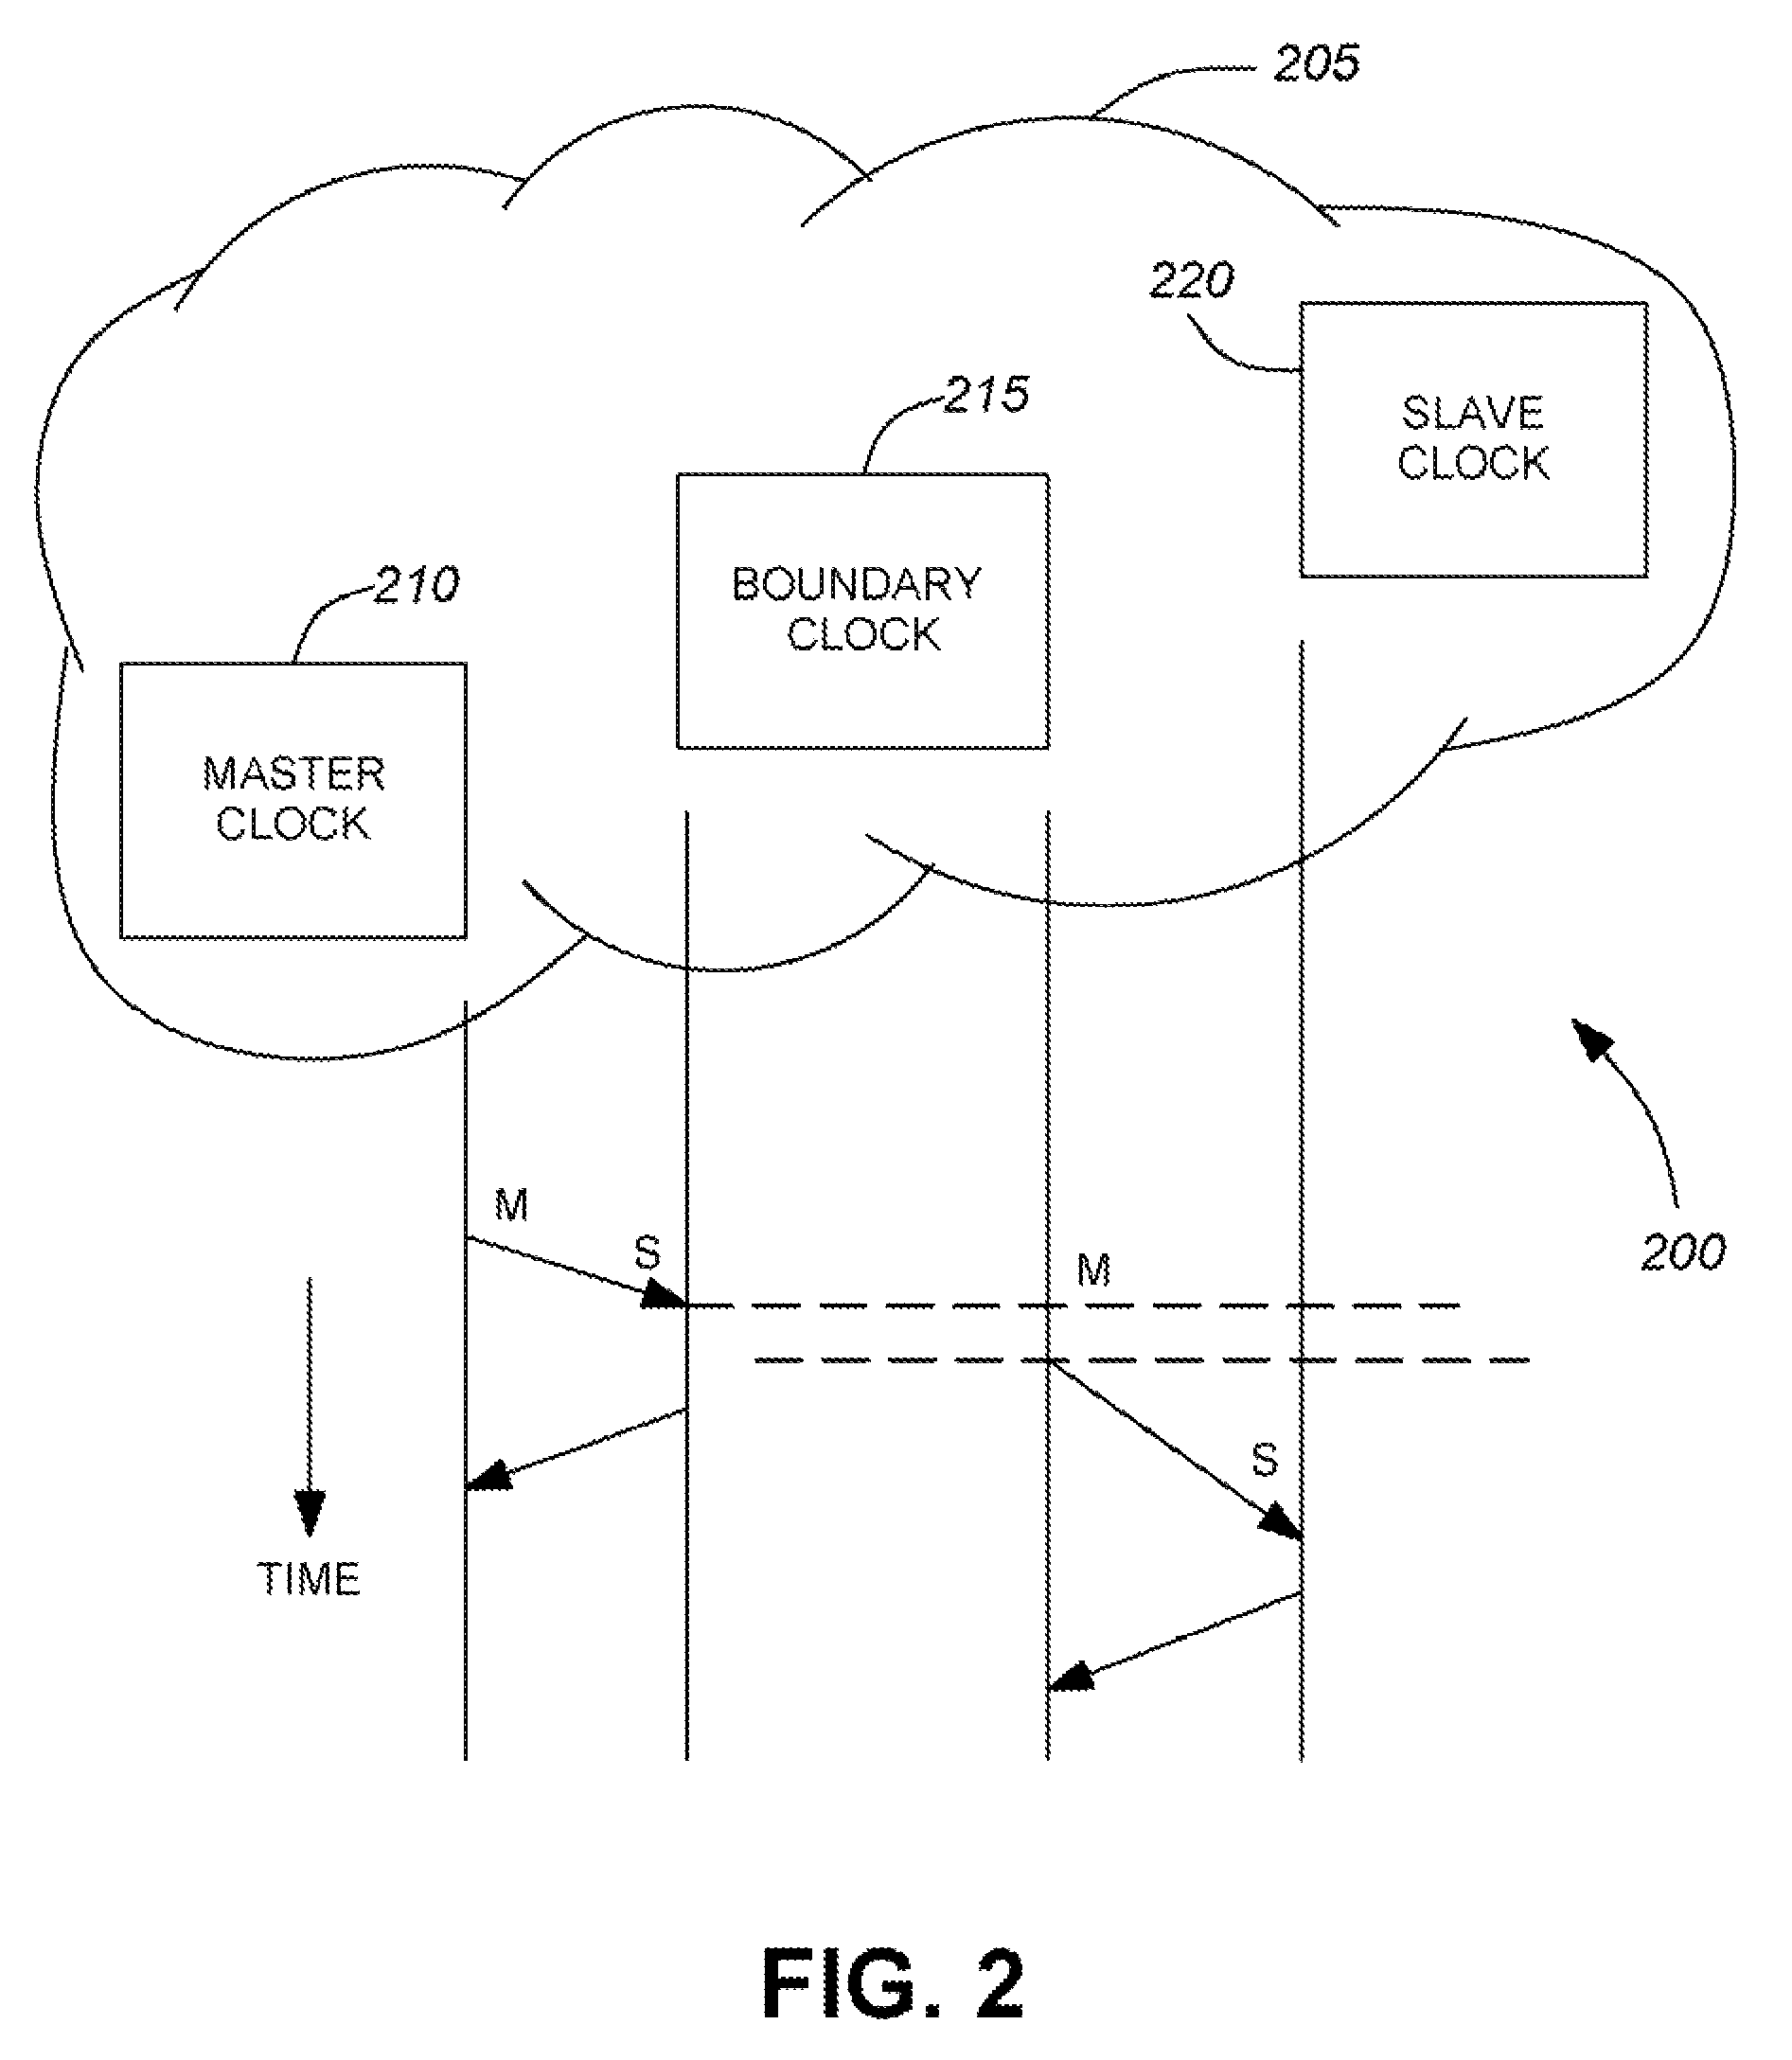 Method for distributing a common time reference within a distributed architecture